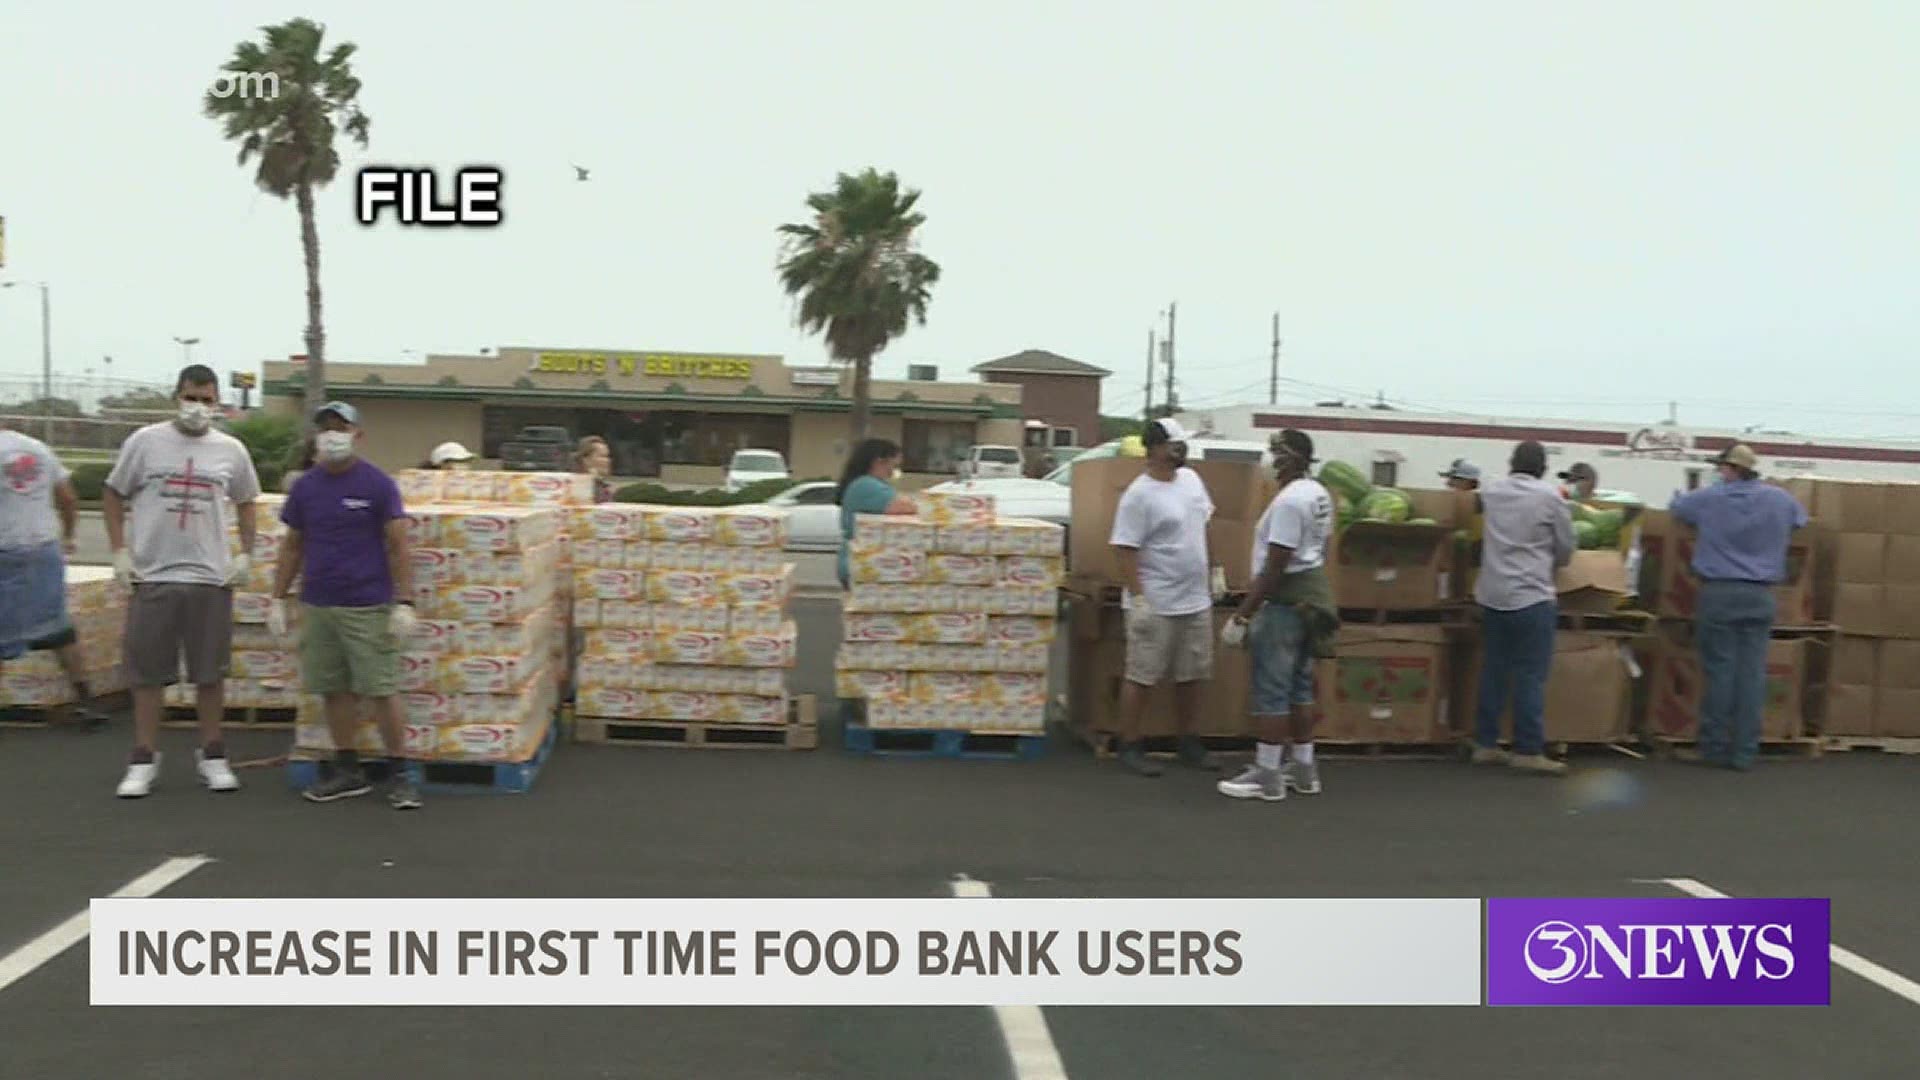 There’s been a surge in the number of people turning to food banks for the first time including here in the Coastal Bend.